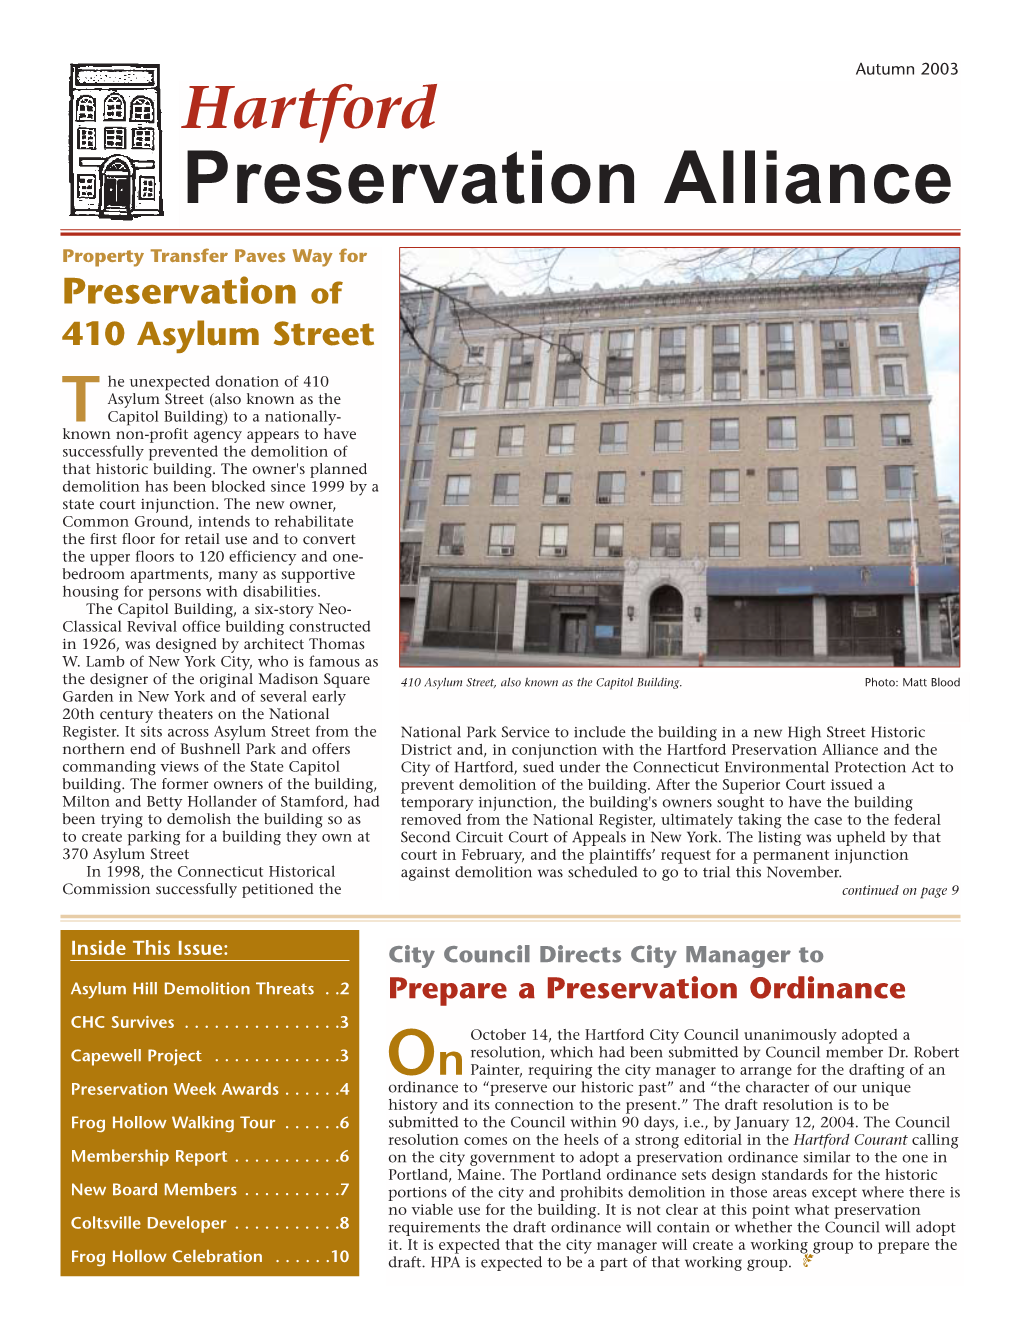 HPA Newsletter 2002 Fall